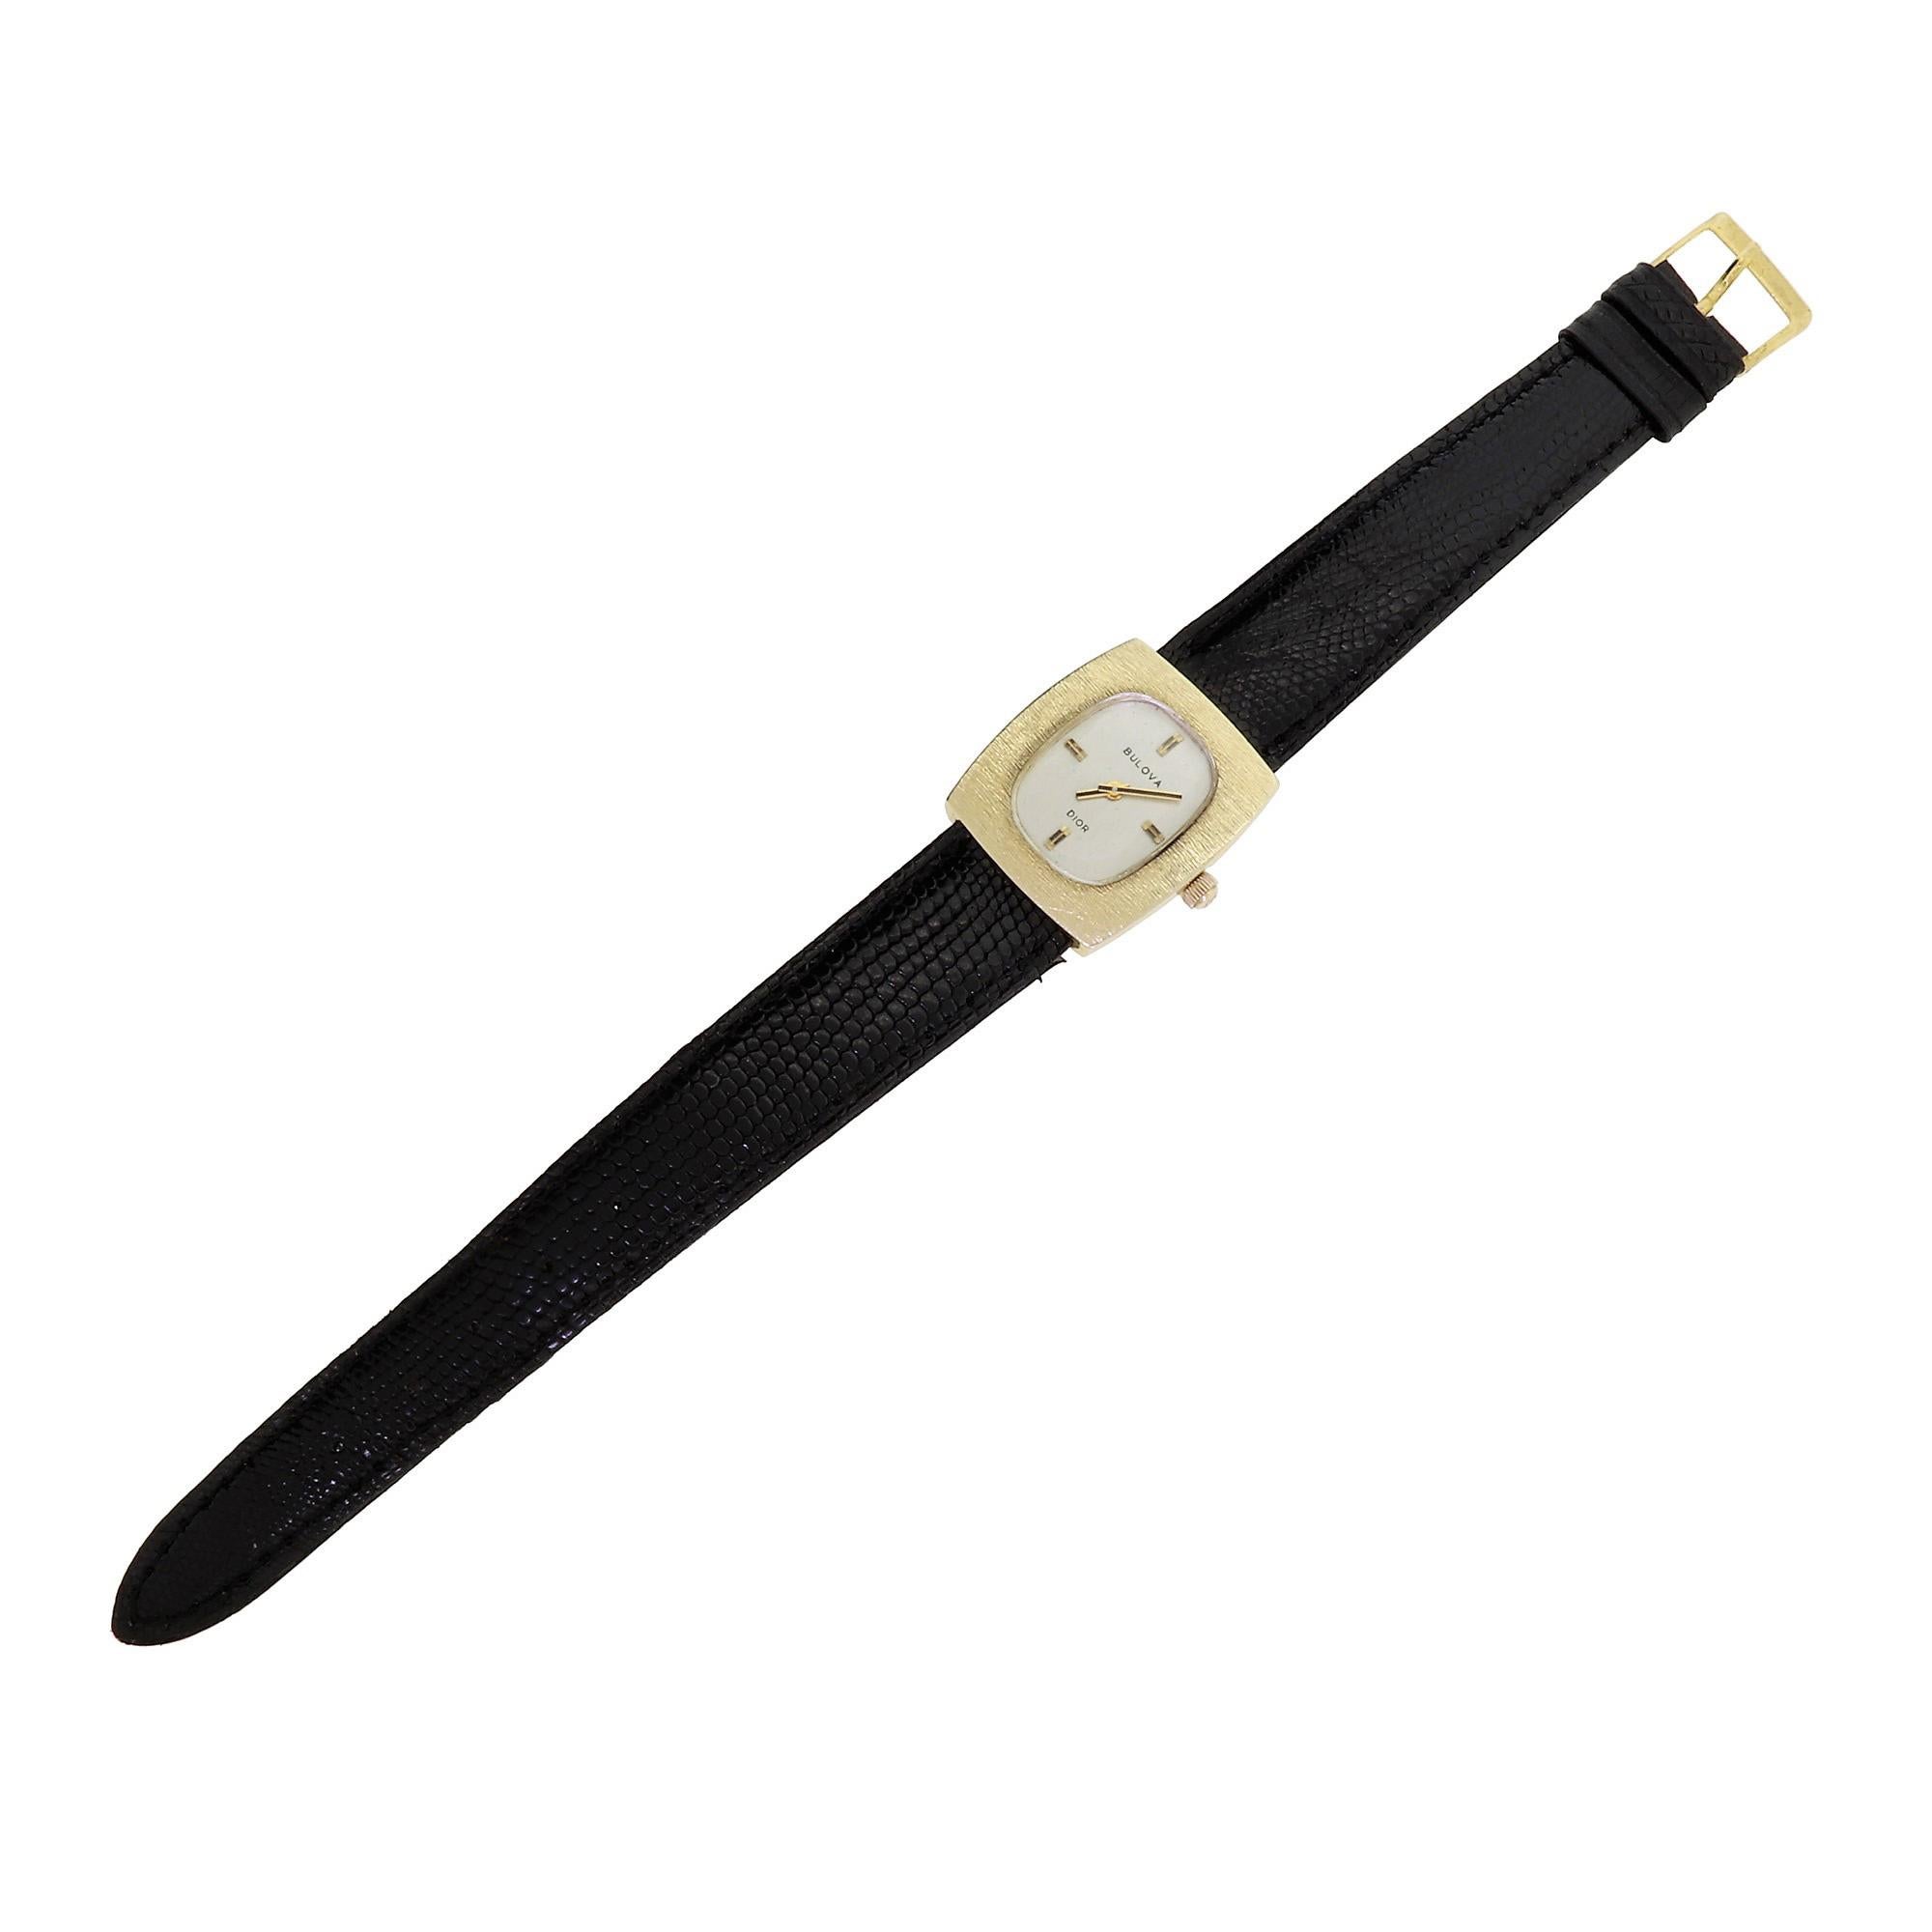 Vintage late 1960s couture ladies watch by Bulova for Christian Dior. Features a solid 14K yellow gold case and crown complemented by a minimalist white dial with gold hand and index accents. This timeless and elegant design by Dior has become